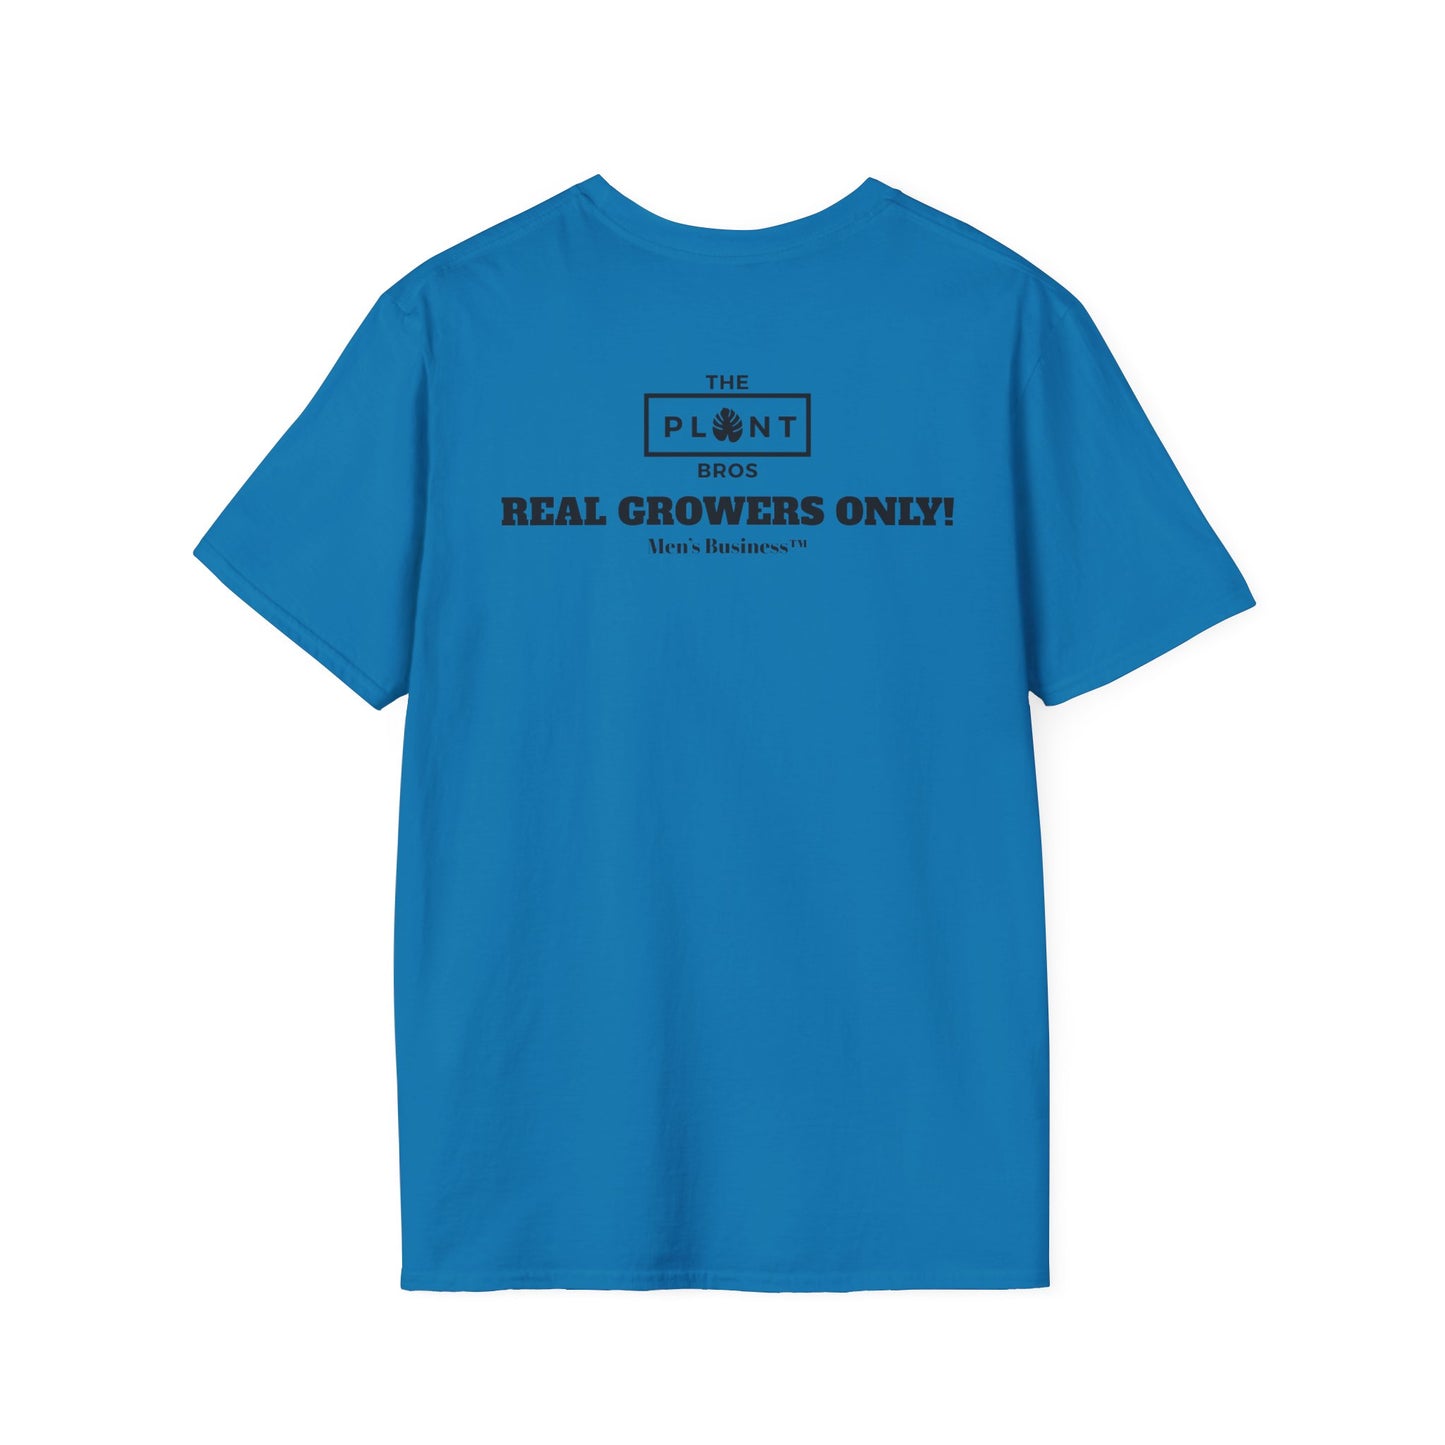 Black "Real Growers Only!"  T-Shirt